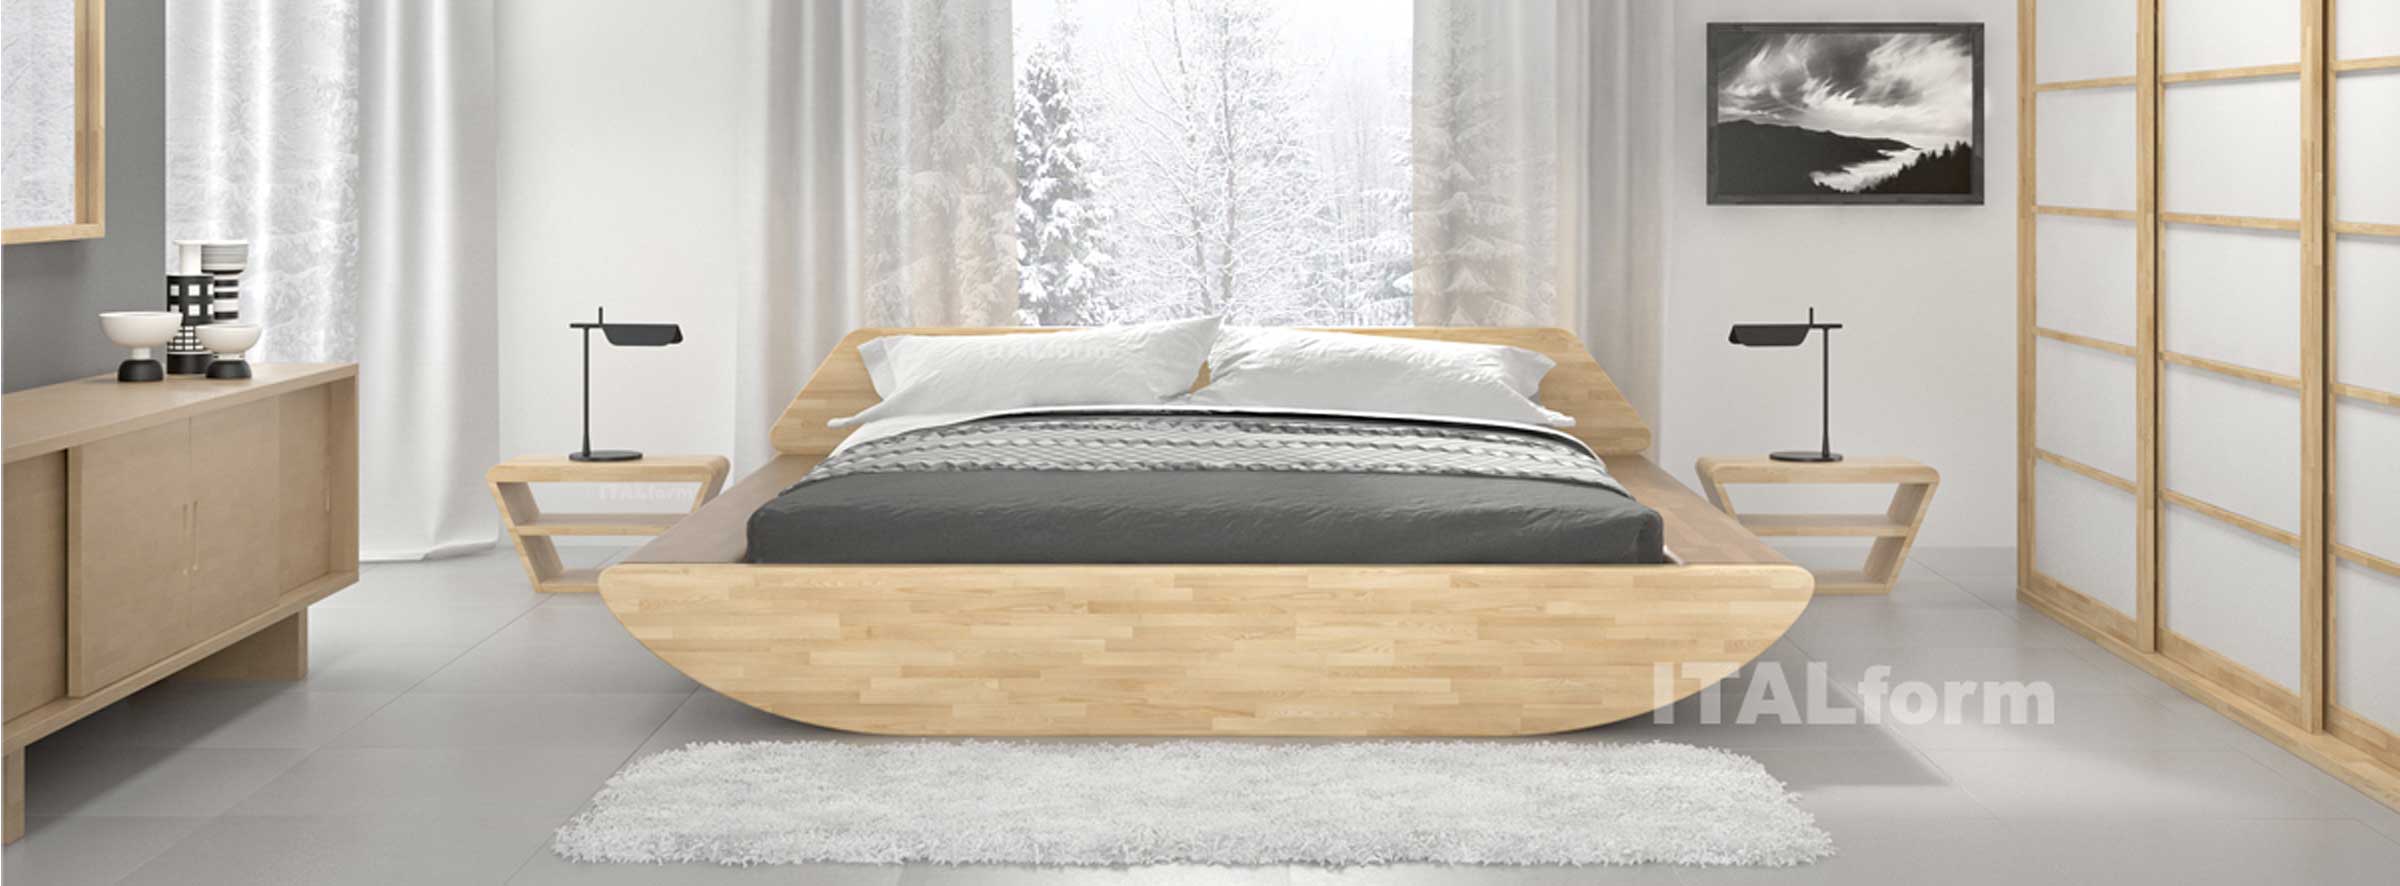 Wooden Beds with Best Solid Laminated Wood | ITALform Design